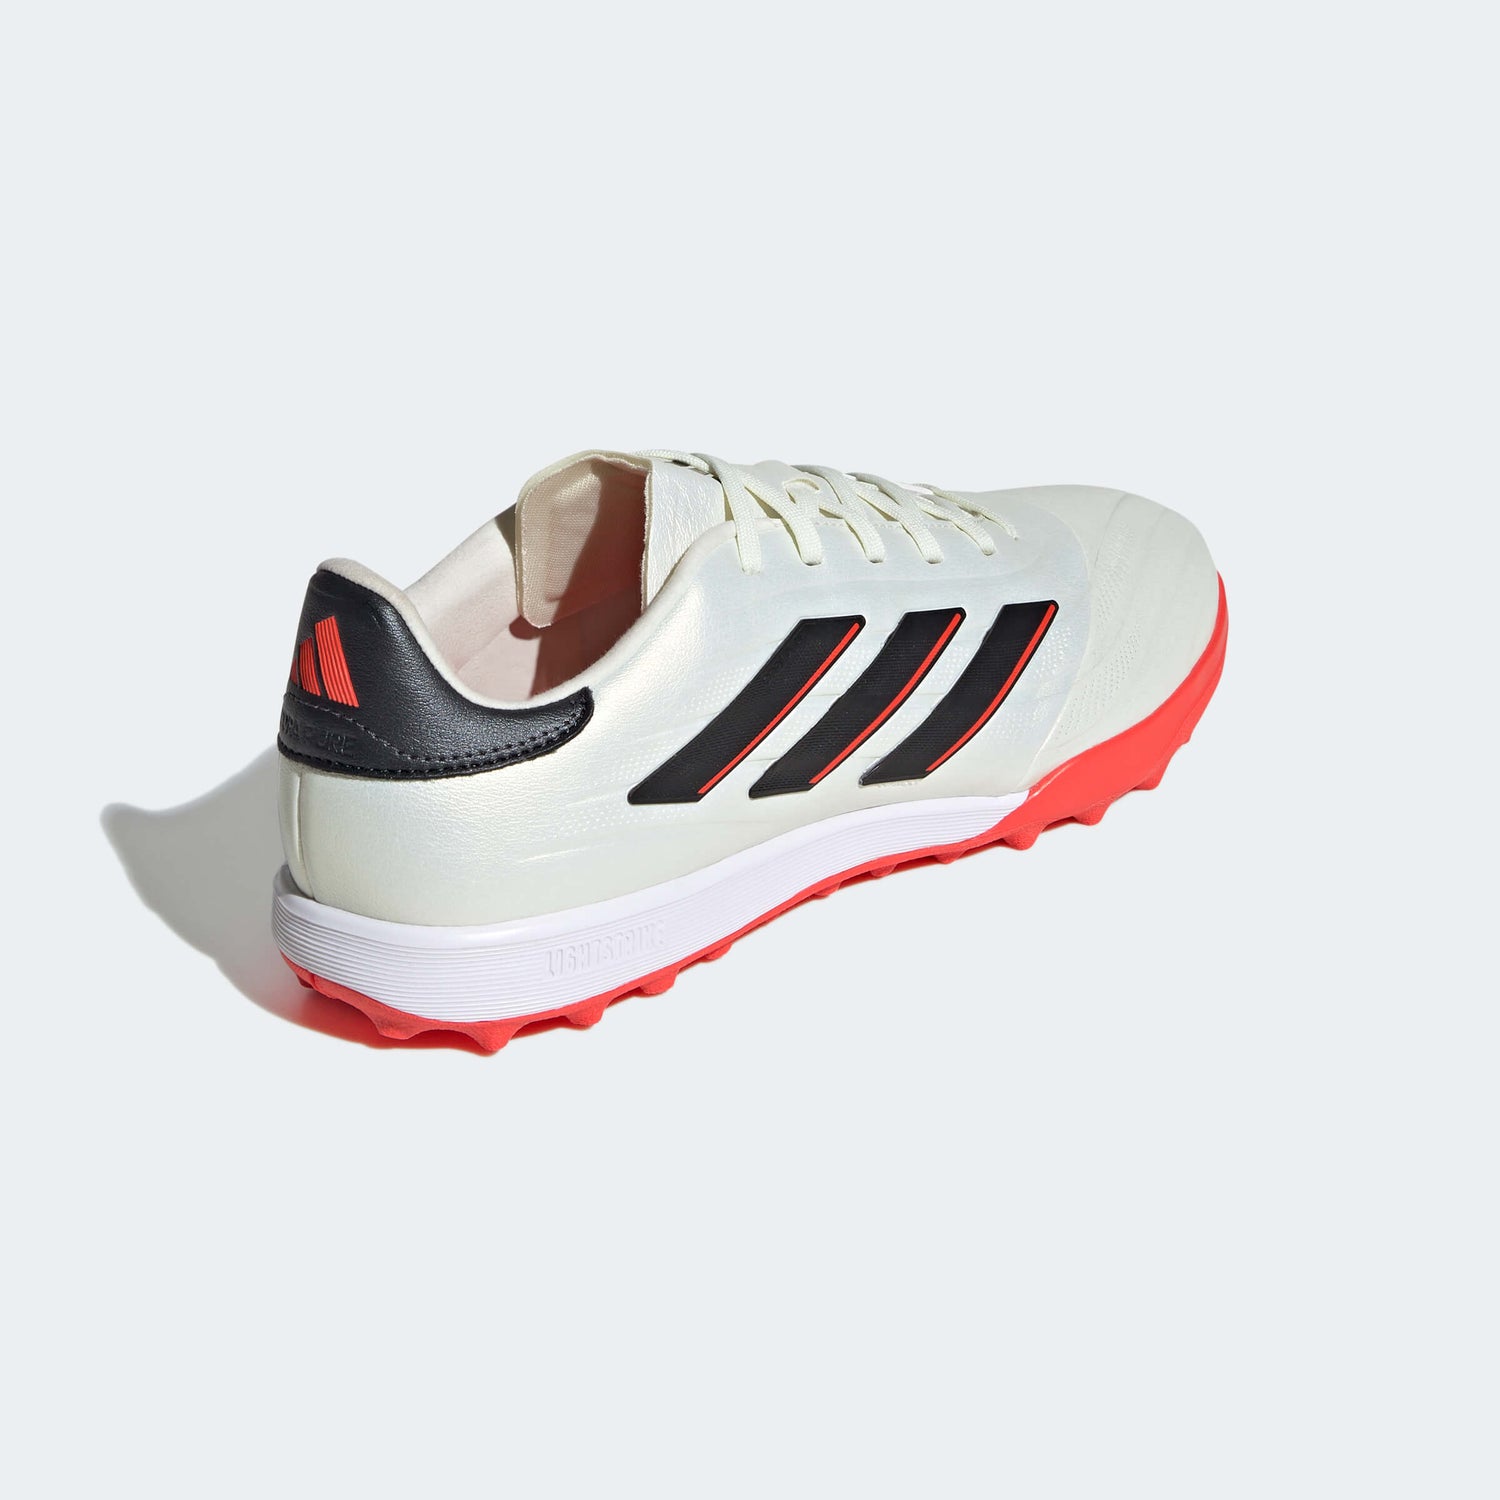 adidas Copa Pure 2 Elite Turf - Solar Energy Pack (SP24) (Lateral - Back)